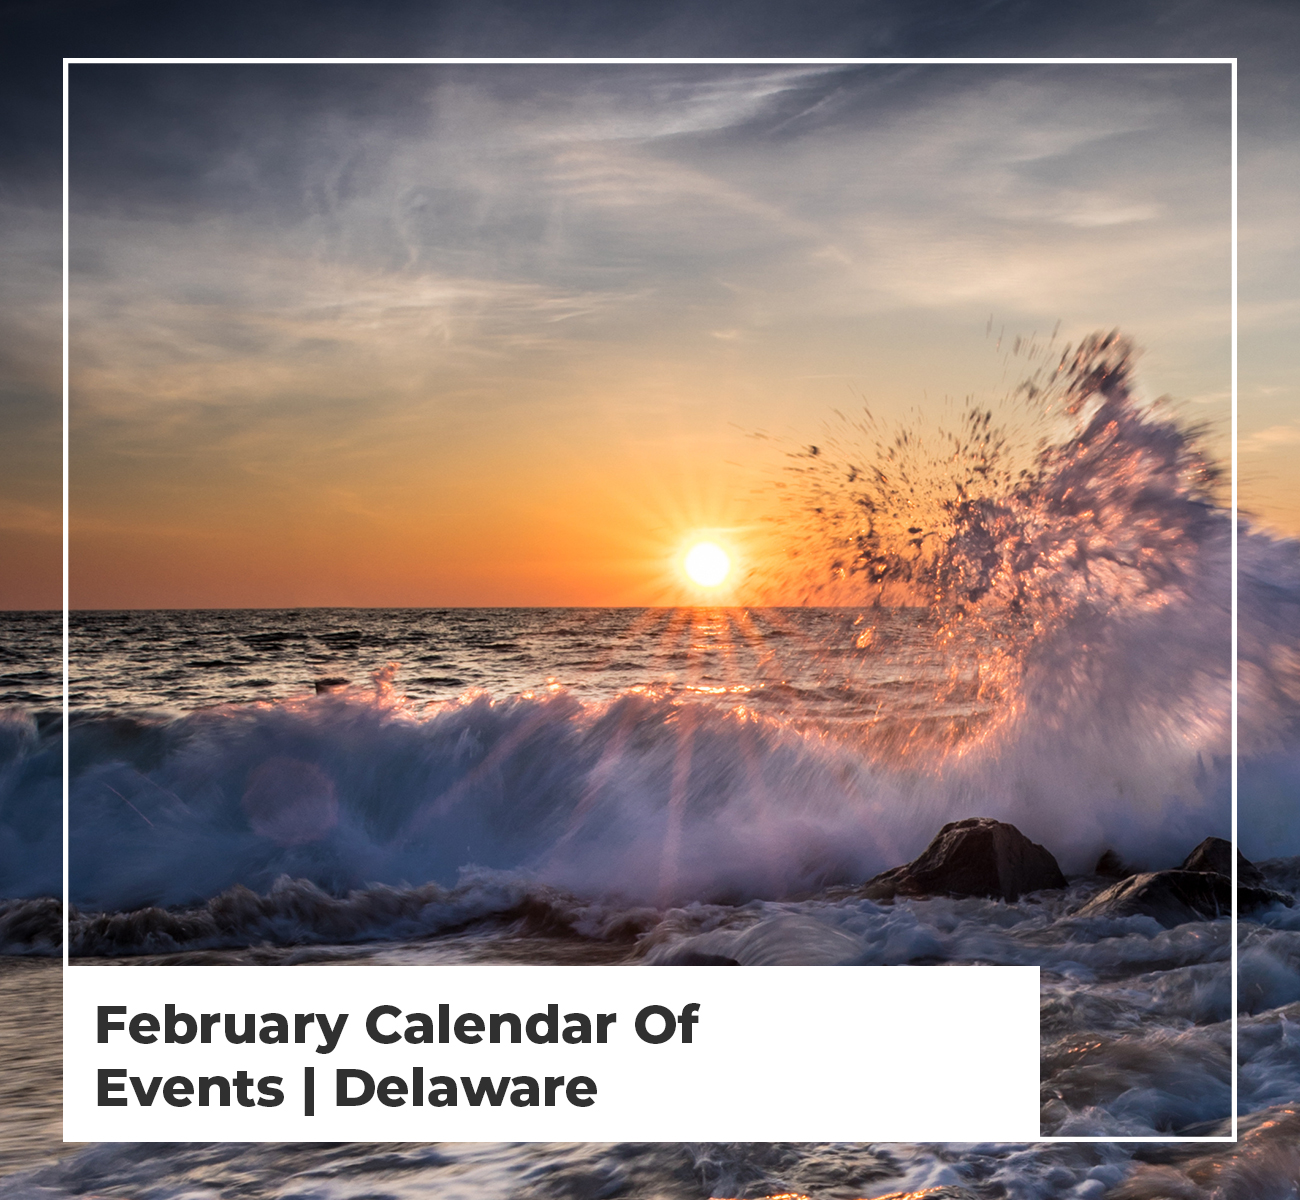 February Calendar Of Events In Delaware